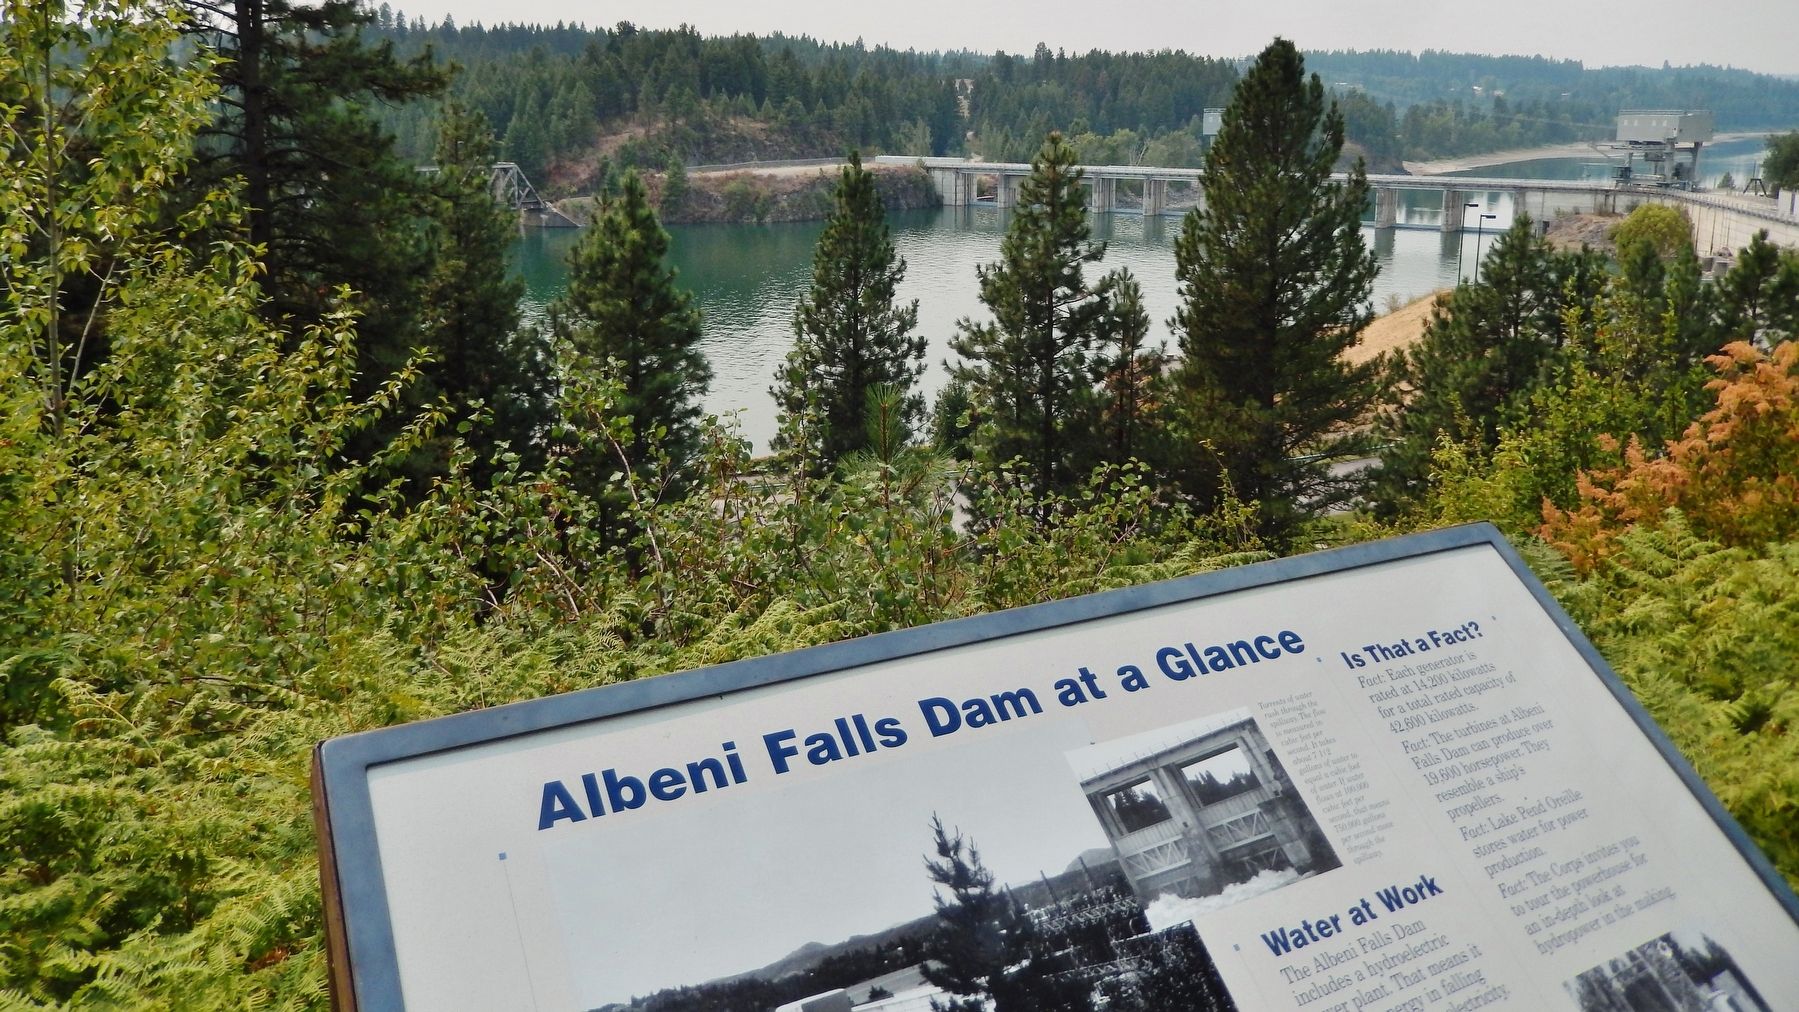 Albeni Falls Dam at a Glance Marker (<i>wide view with dam in background</i>) image. Click for full size.